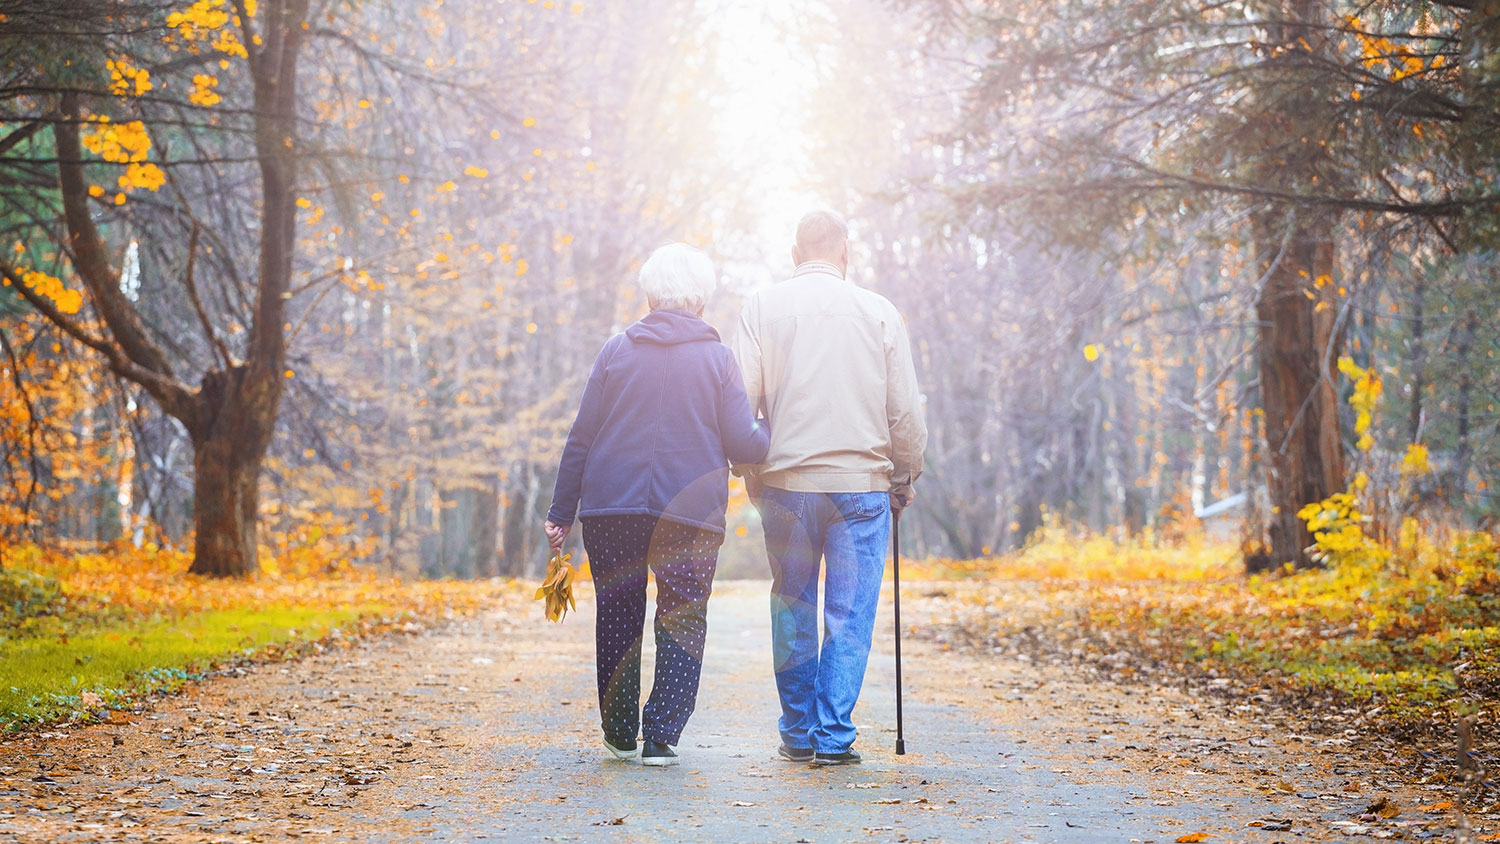 In this touching image, an elderly couple walks hand in hand through a lush canopy of foliage, their backs to the viewer. Their intertwined arms signify a lifetime of support and commitment. This poignant scene evokes the idea of resilience and the enduring nature of love. Just as their strong connection has stood the test of time, so too can couples find renewed hope and harmony through Marriage Counseling in Atlanta, fostering enduring relationships that withstand the challenges of life.